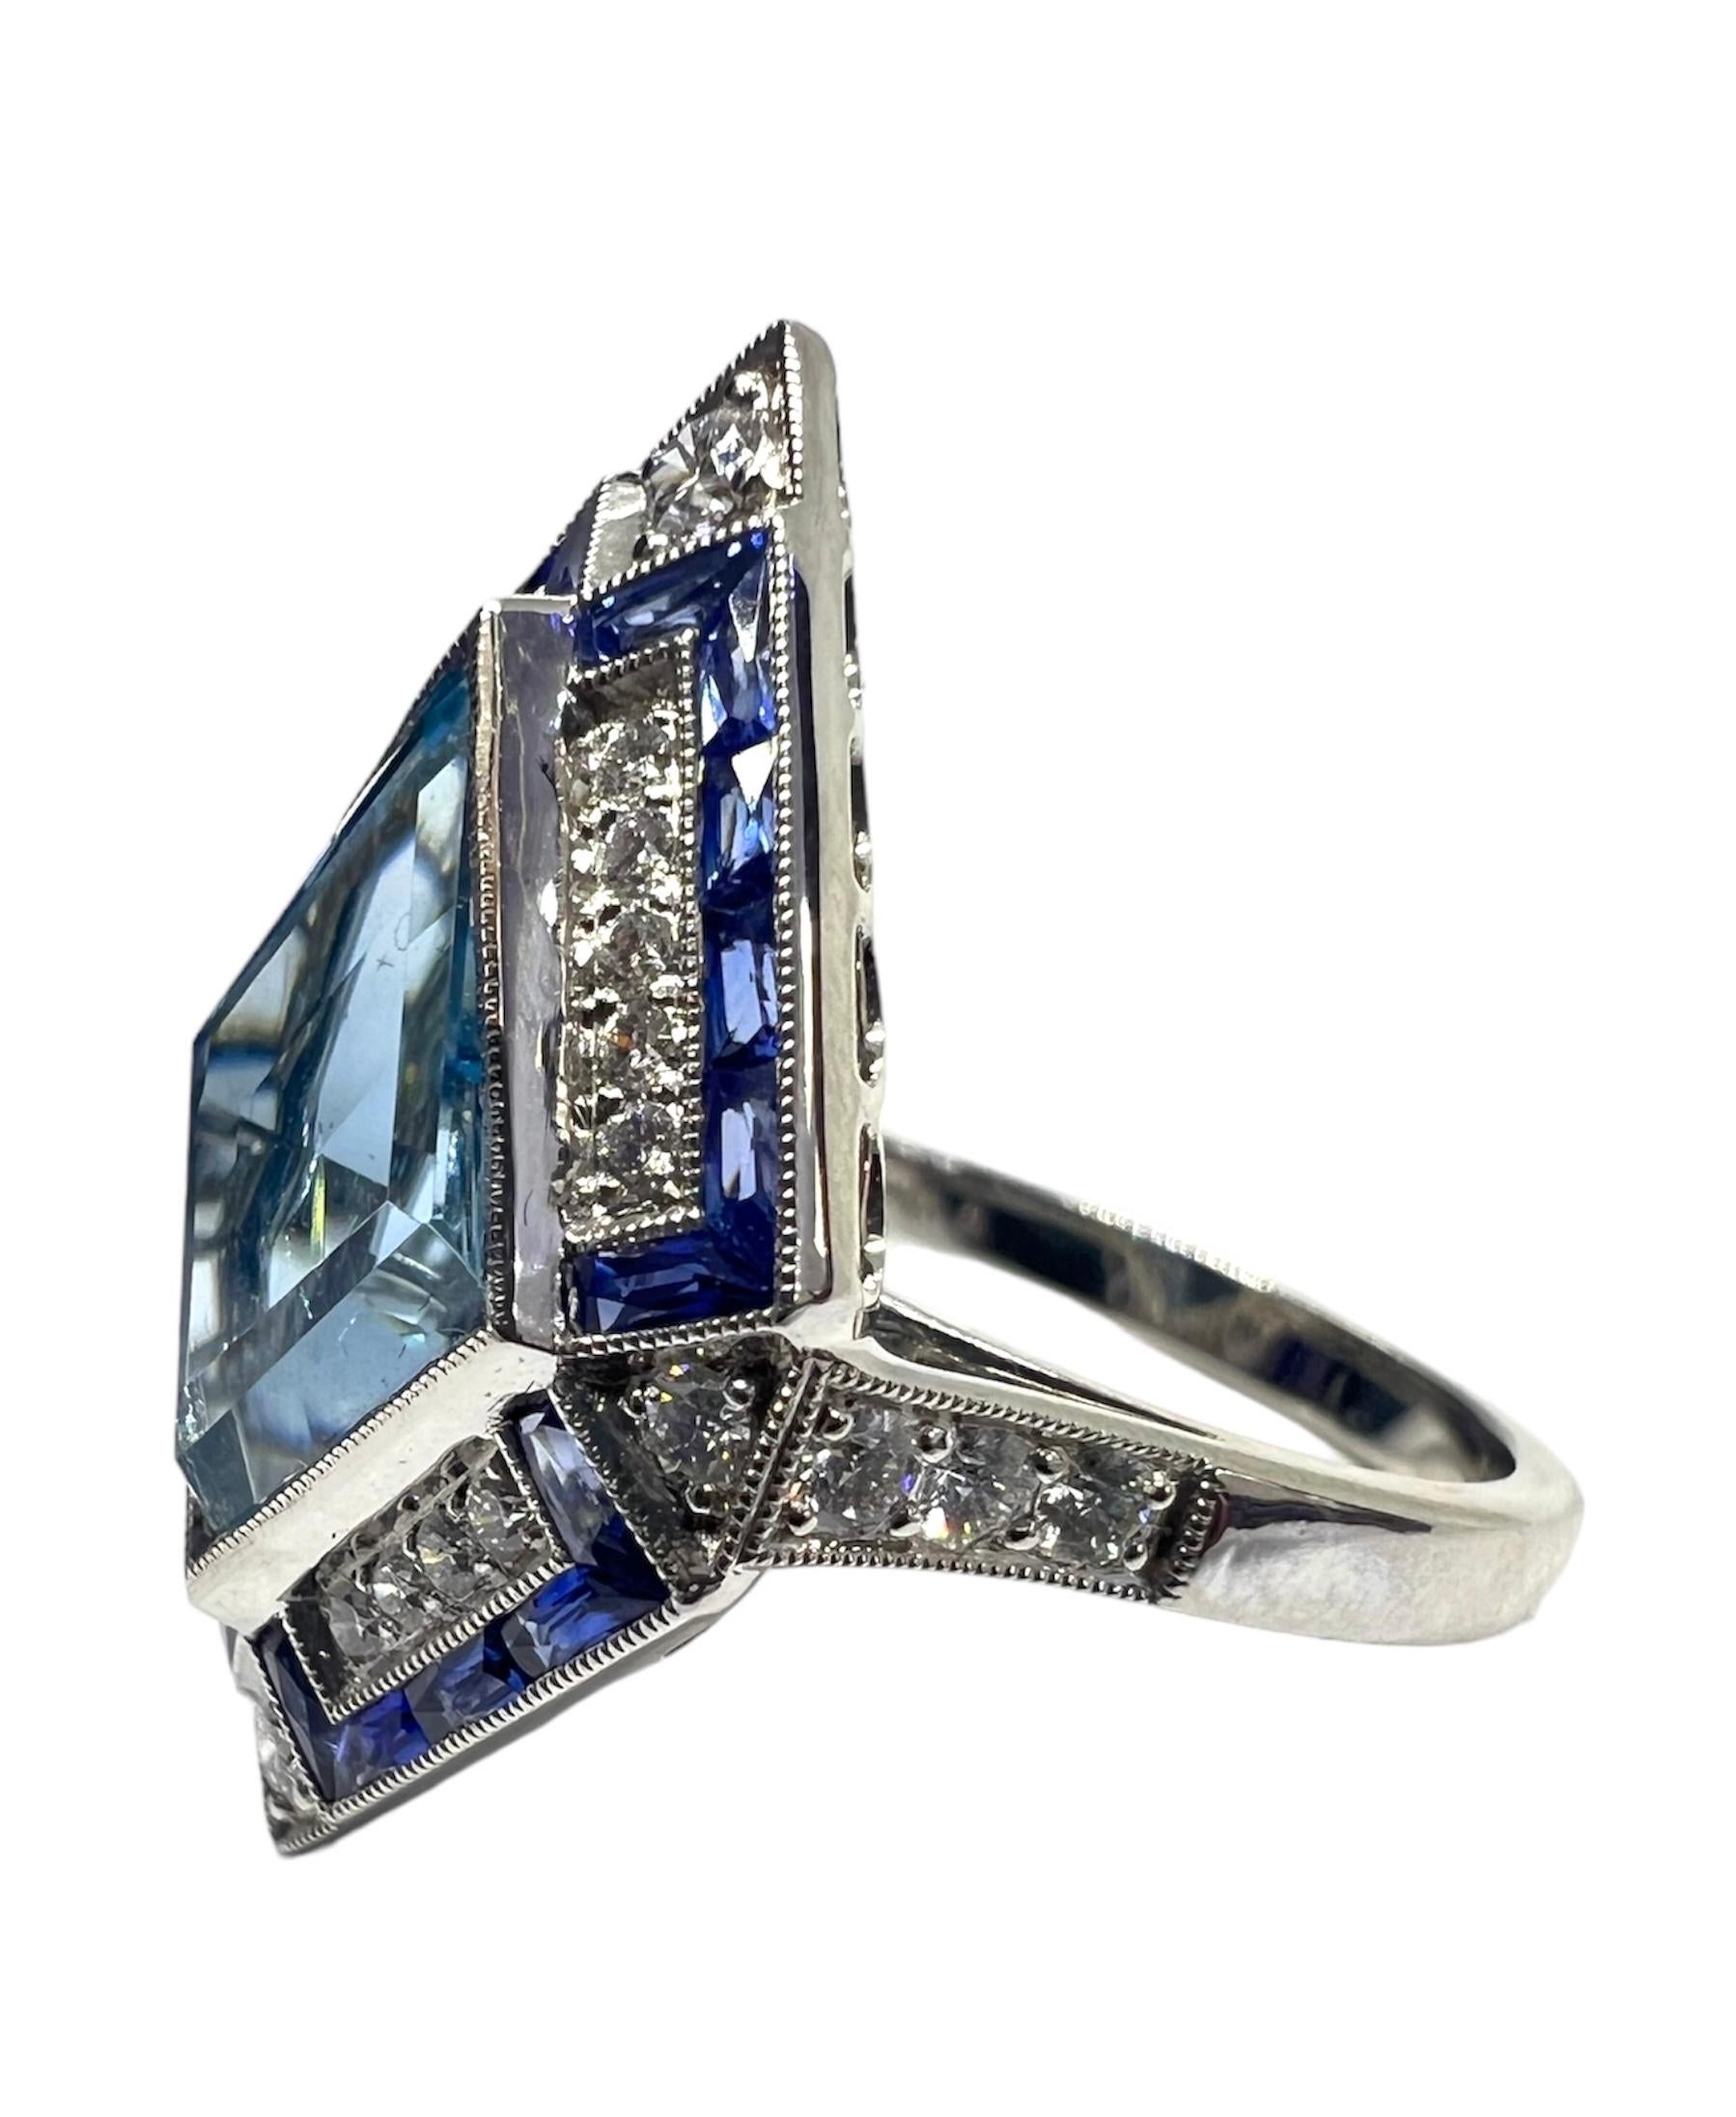 An art deco inspired platinum ring with 3.60 carat aquamarine, 0.41 carat diamond and 0.75 carat sapphire.

Sophia D by Joseph Dardashti LTD has been known worldwide for 35 years and are inspired by classic Art Deco design that merges with modern